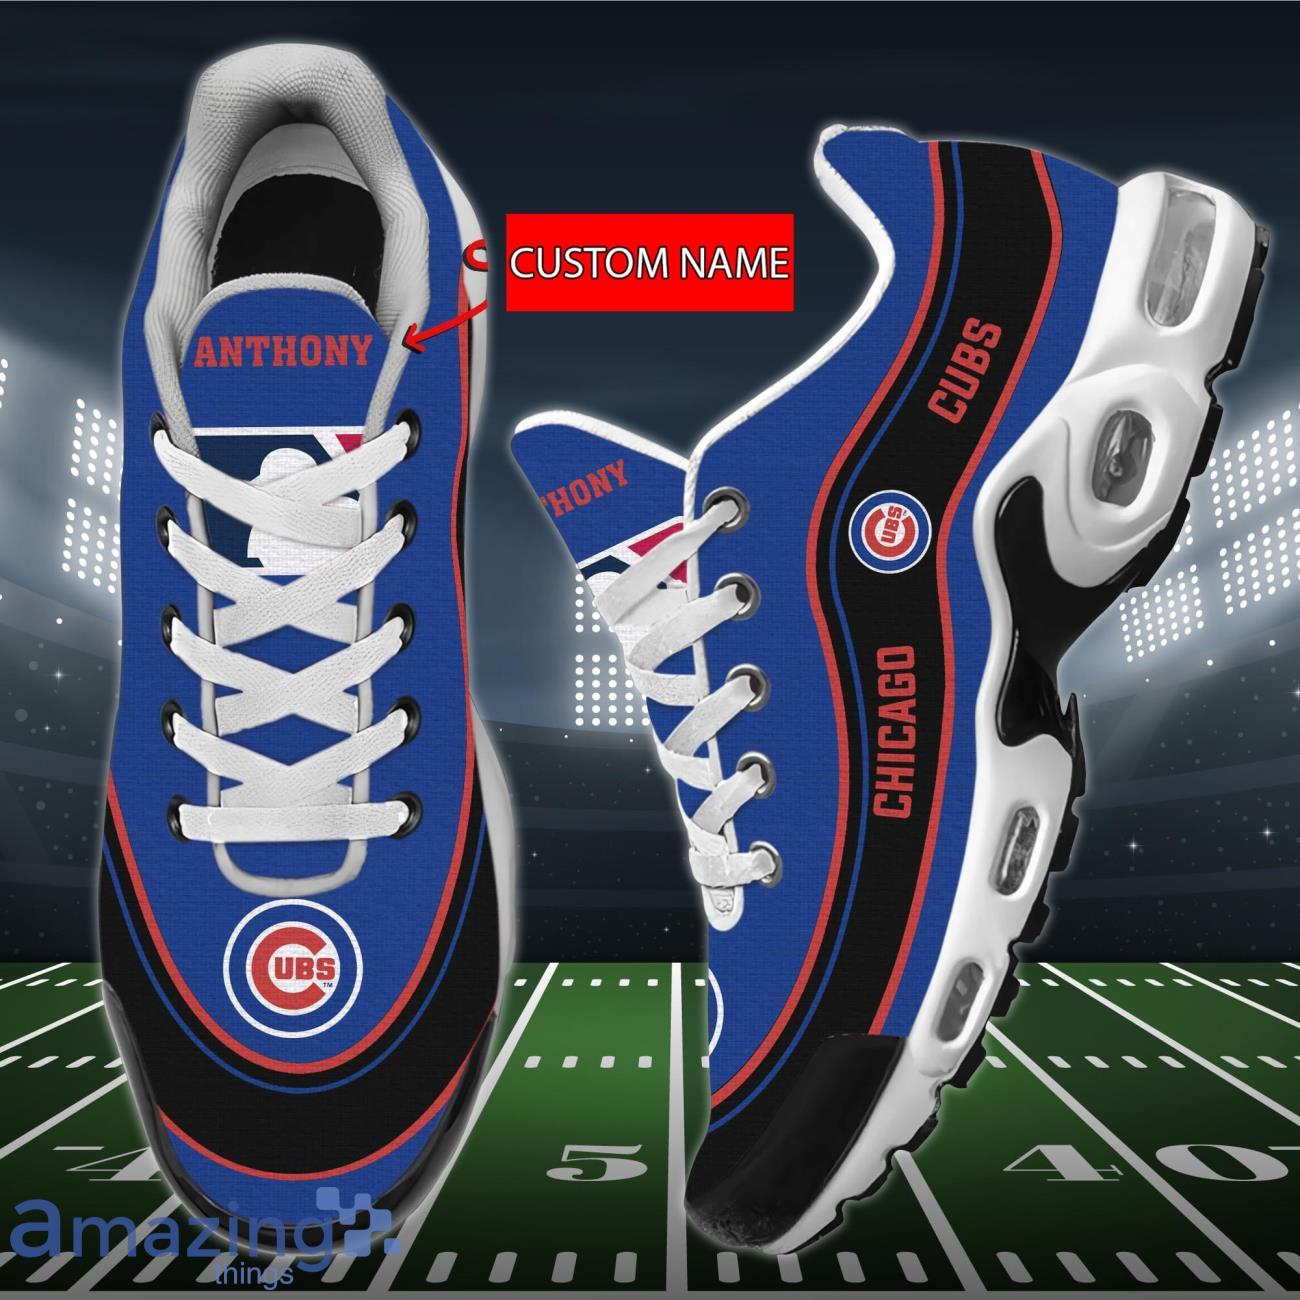  Adult 2XL Chicago Cubs Custom (Any Name/# on